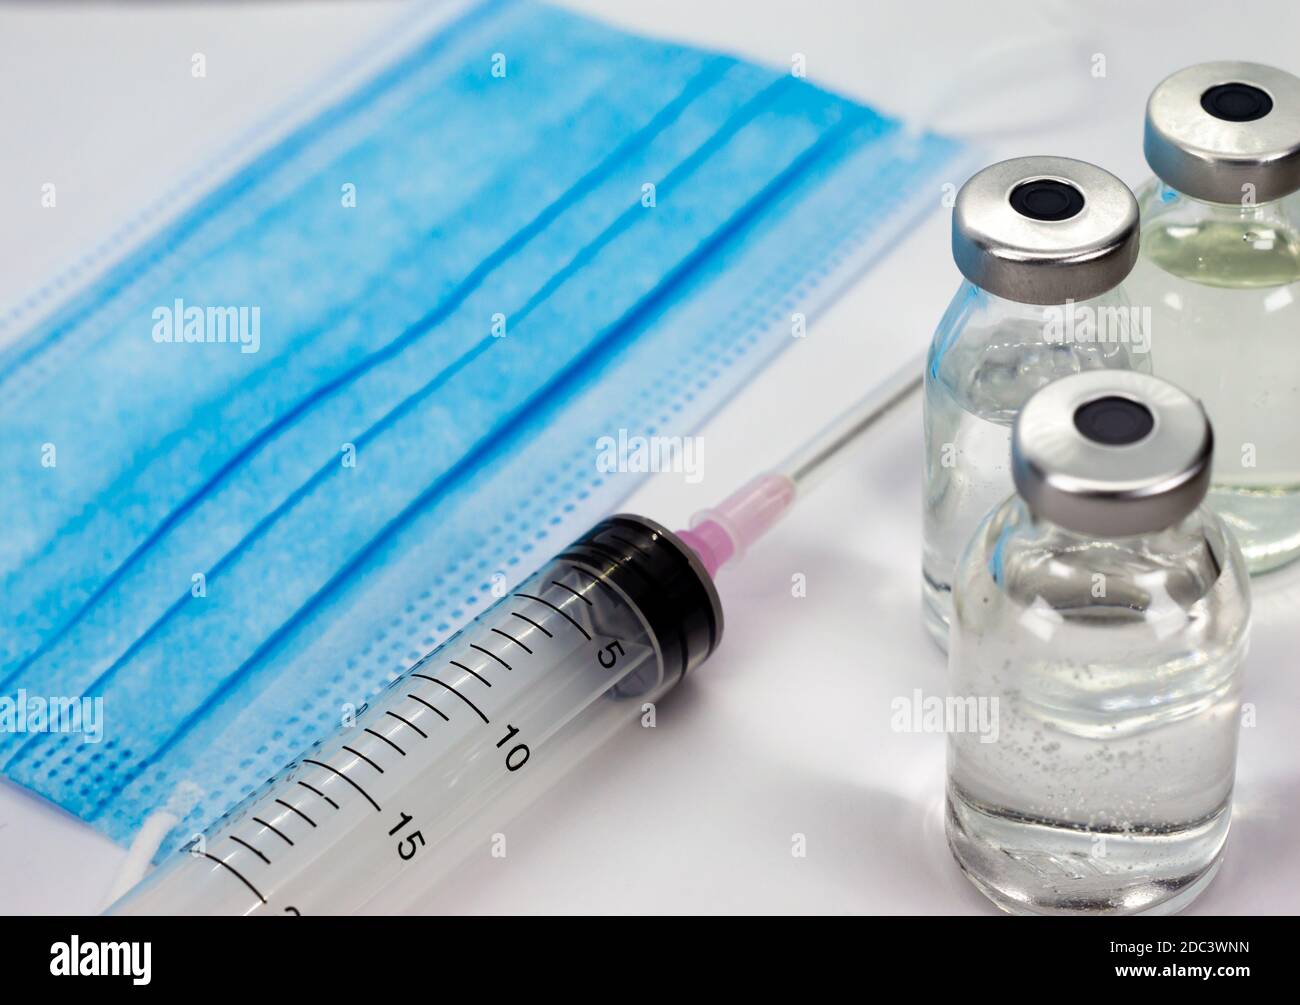 Vaccine Vial, Syringe and blue Medical Face Mask Stock Photo